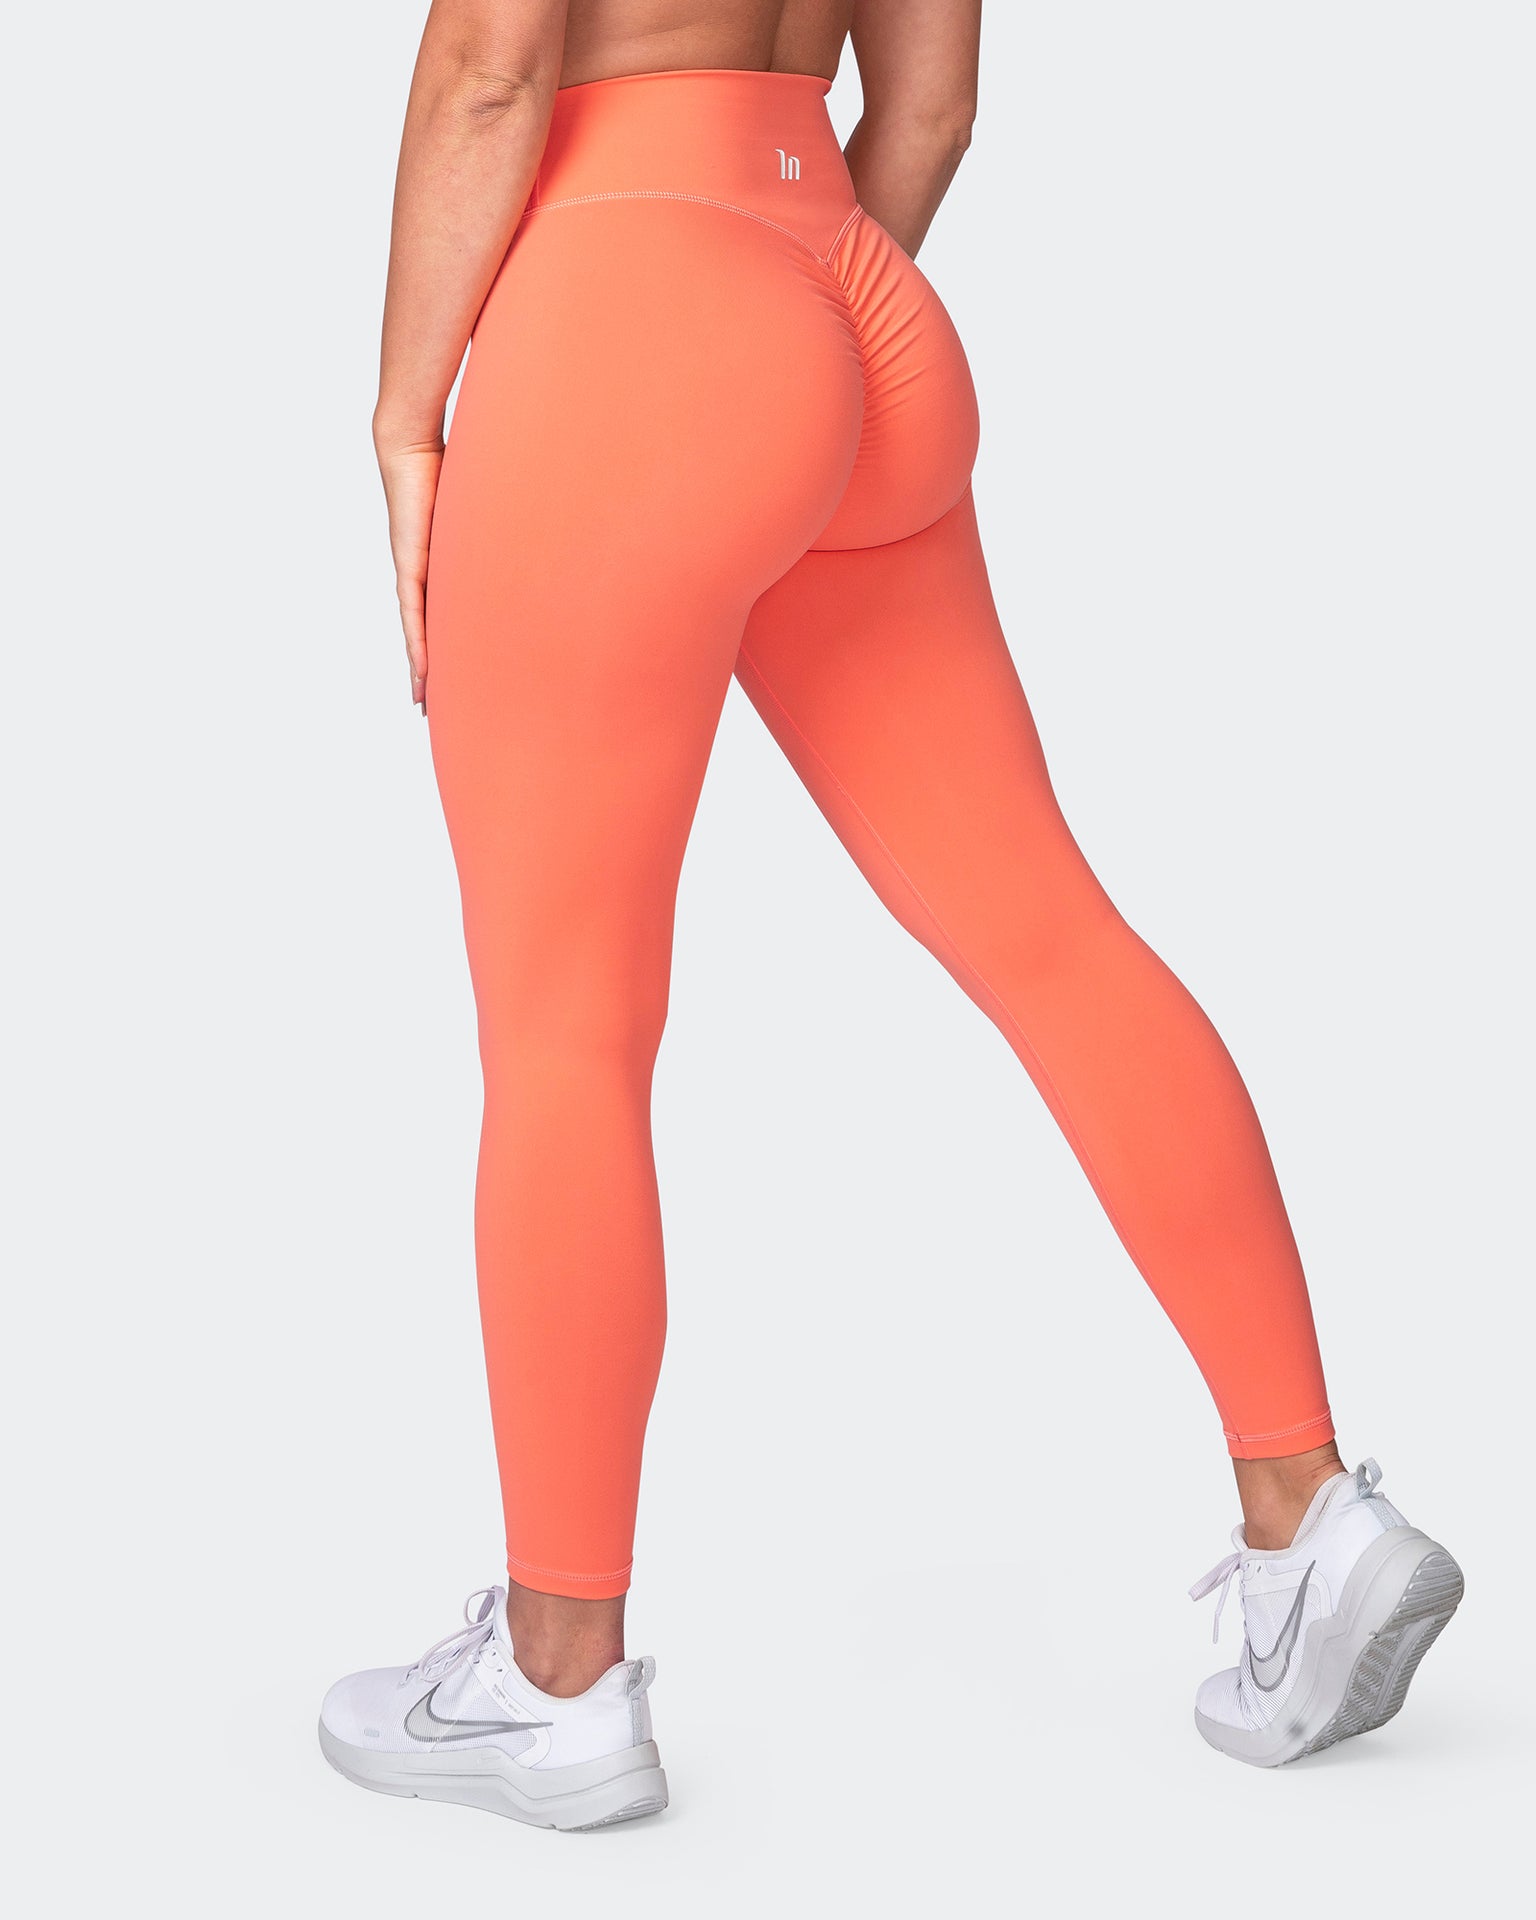 Signature Scrunch Ankle Length Leggings - Hot Pink - Muscle Nation